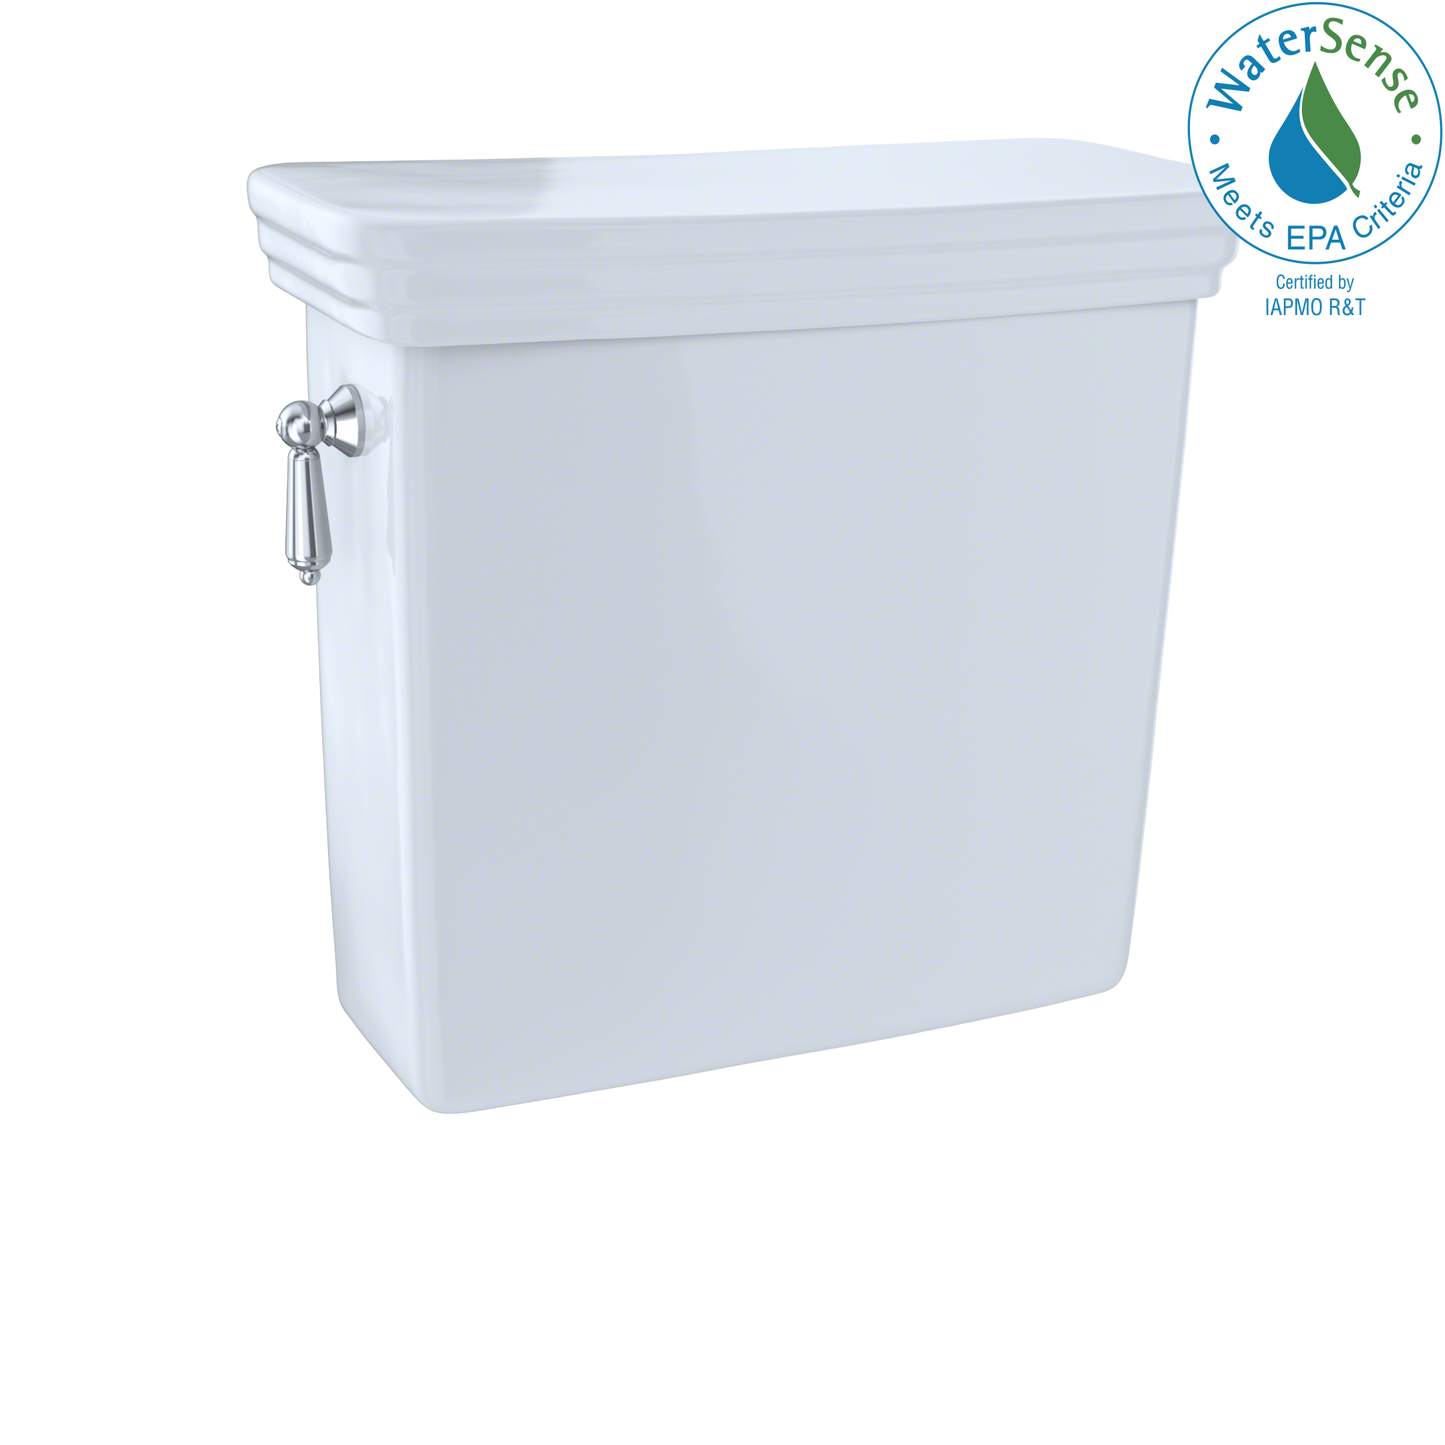 Toto ST424E#01 - Promenade Tank with E-Max Flushing System, Cotton White (Tank Only)